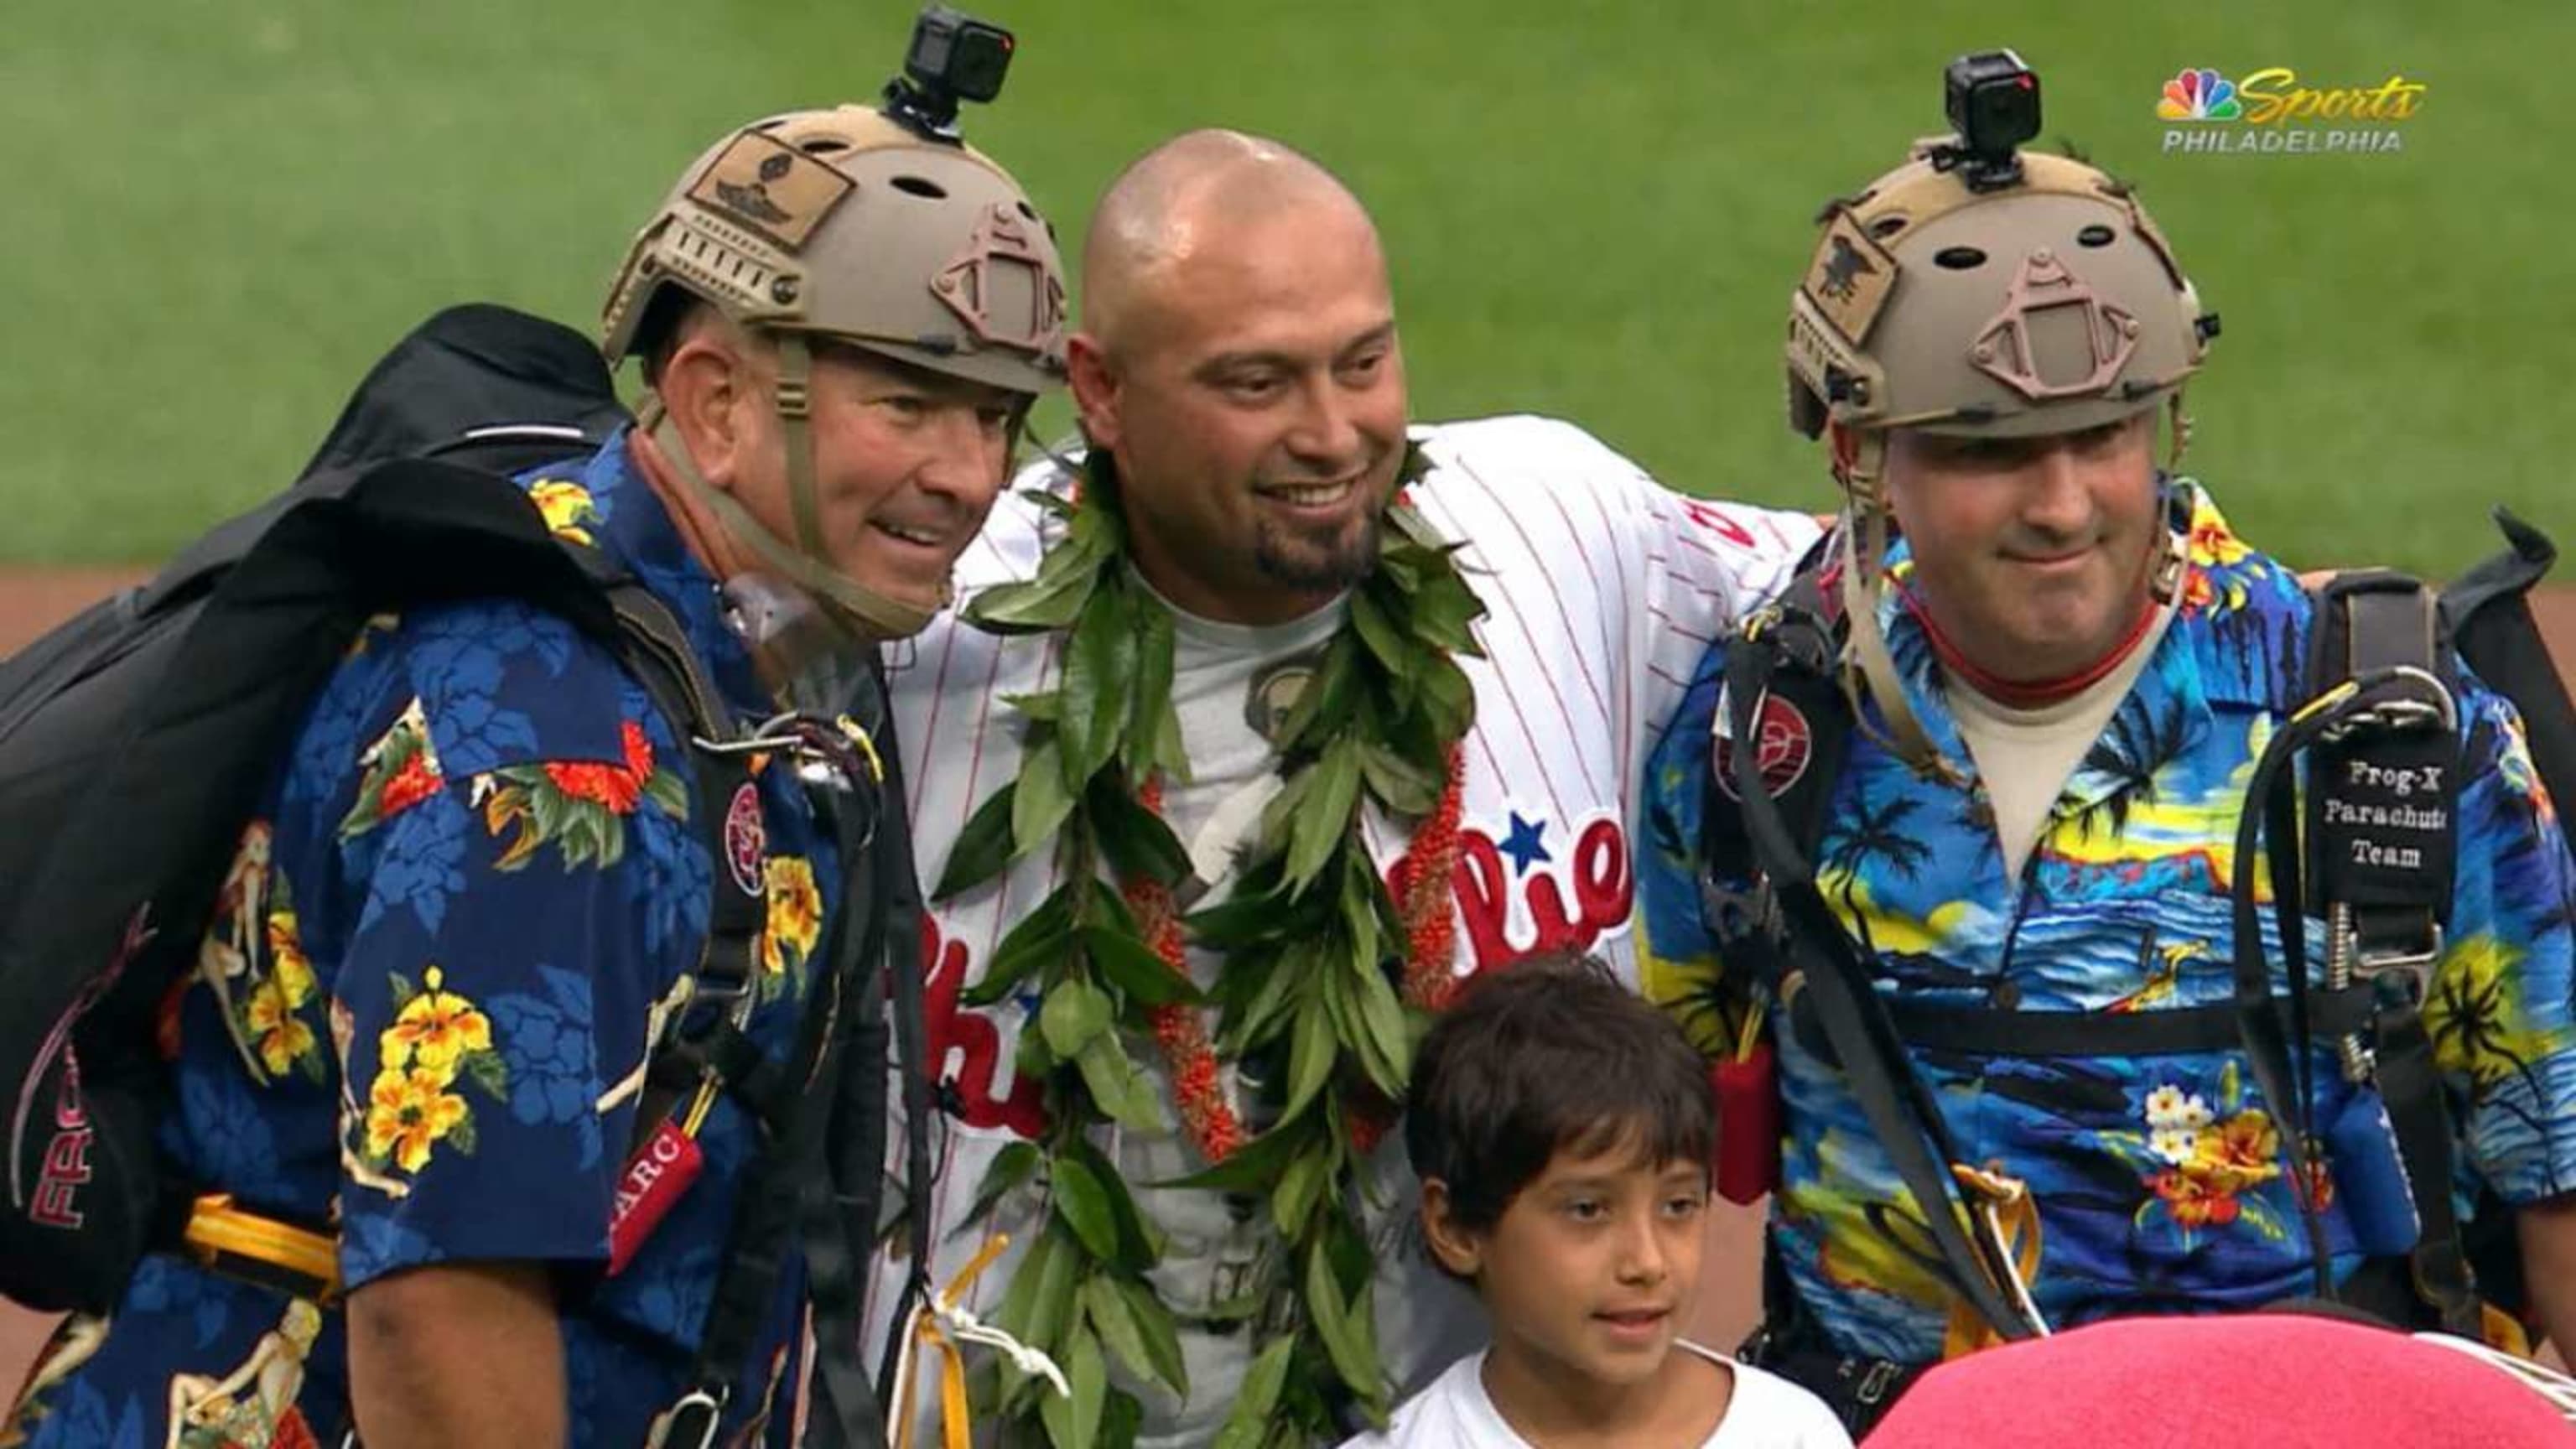 Phillies 2008 World Series championship team honored before game